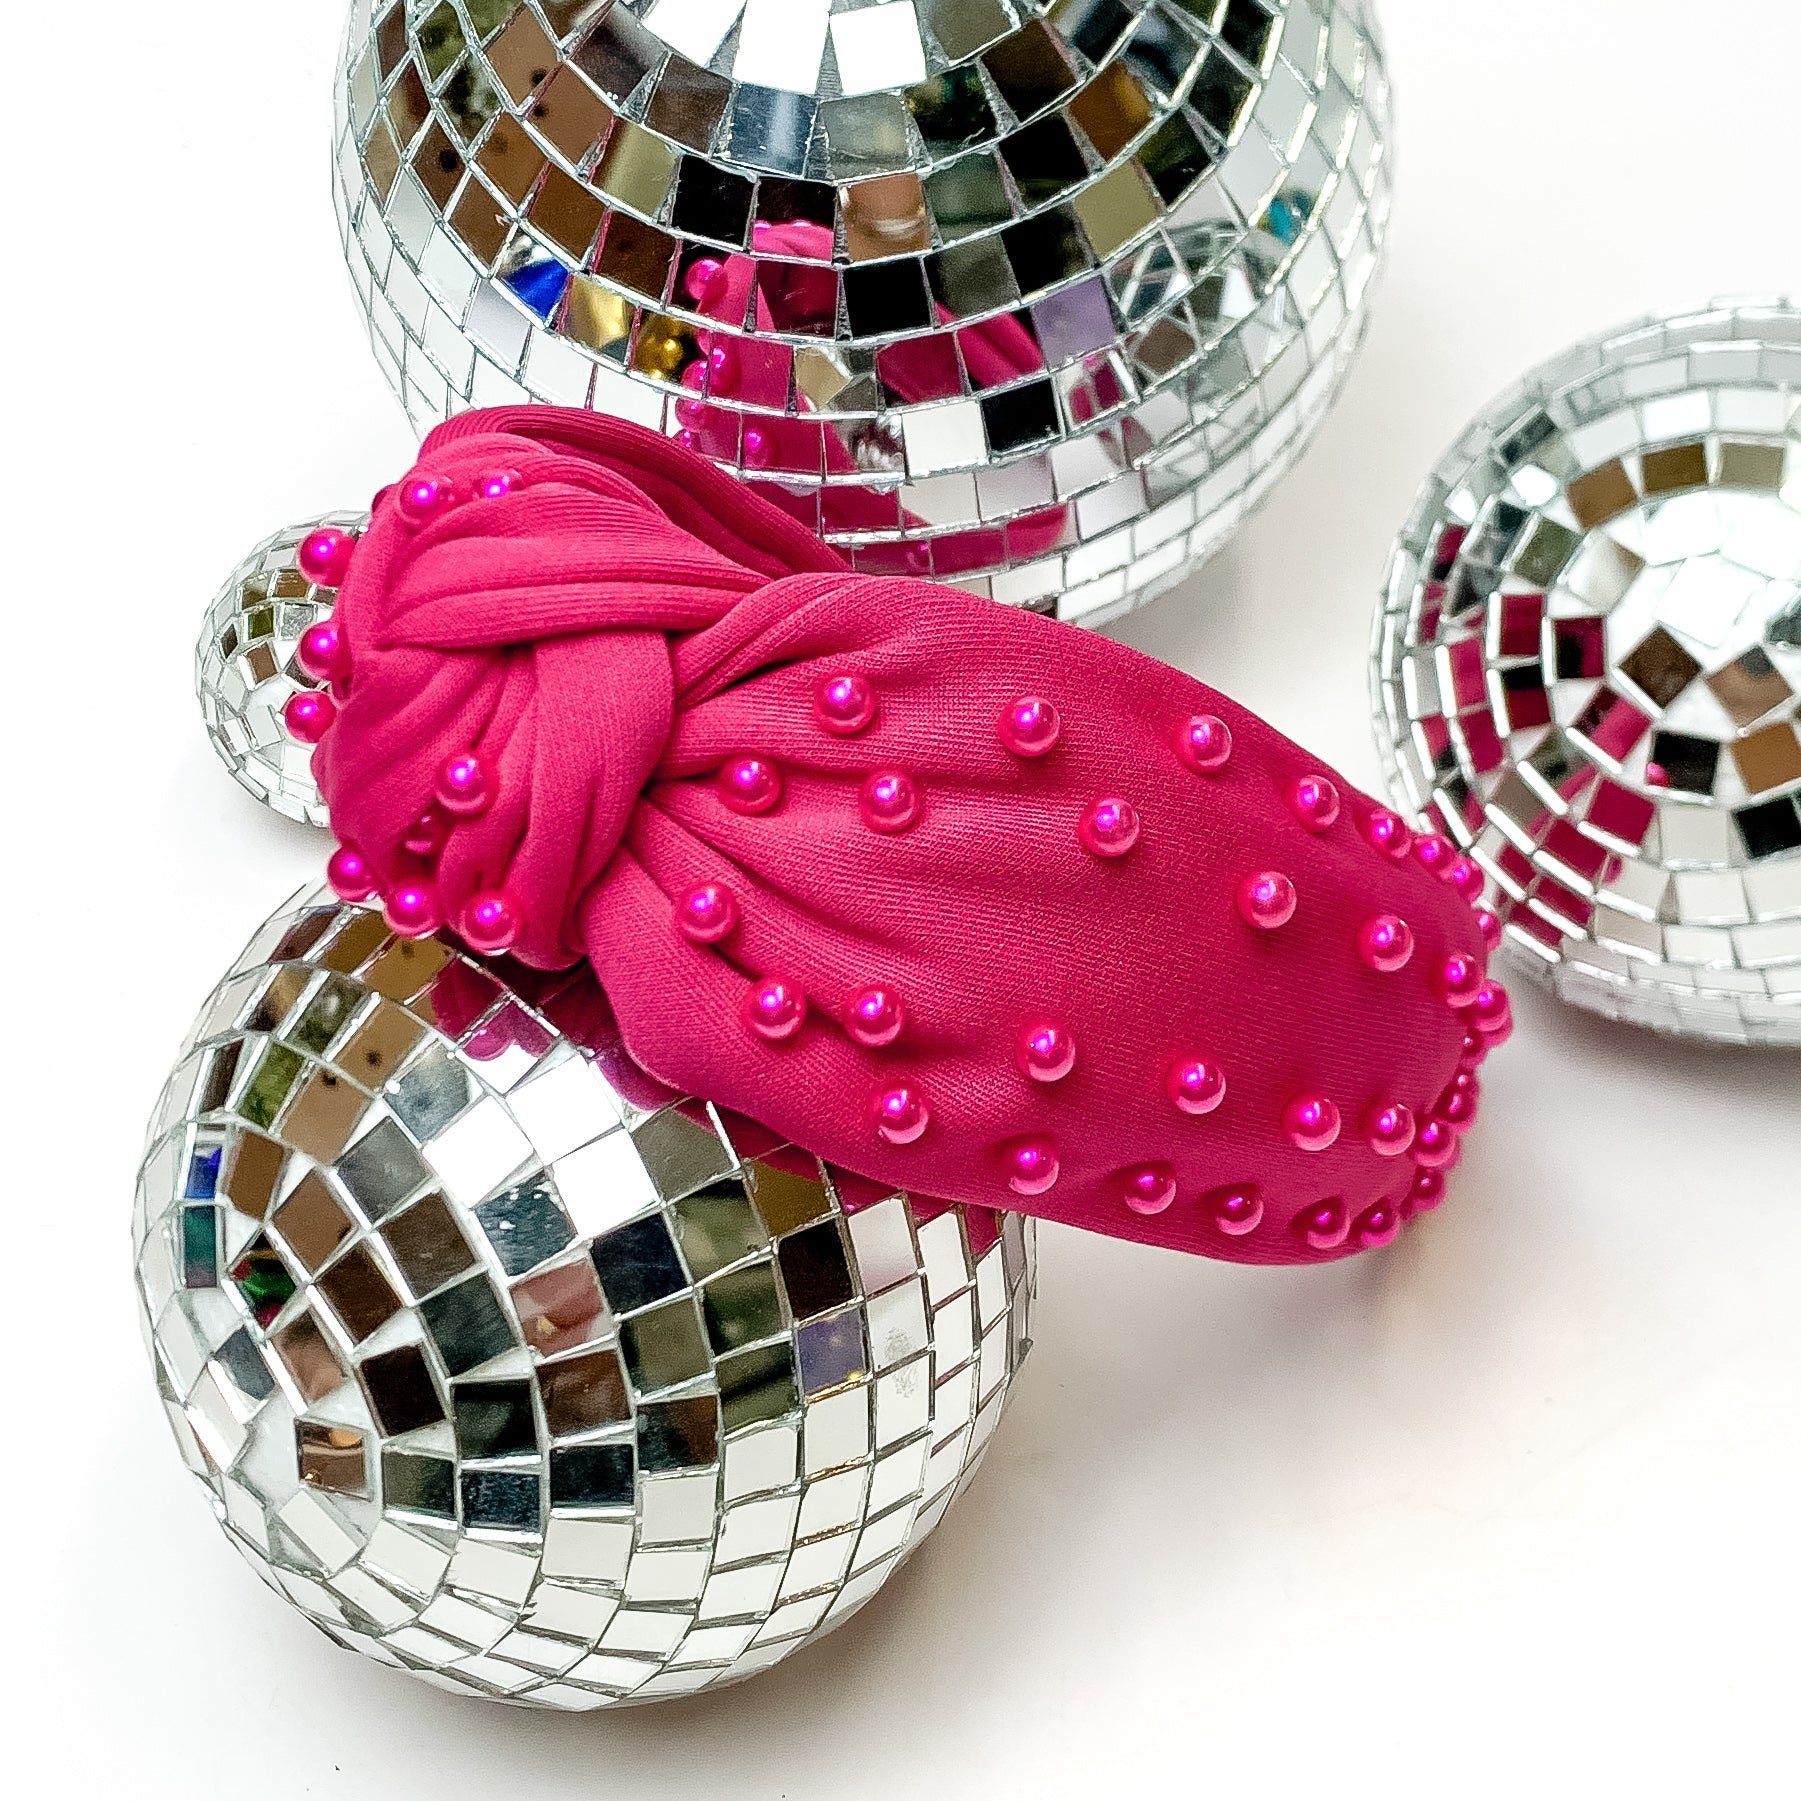 Hot Pink Headband With Pink Pearls. This headband is pictured on a white background and is surrounded by disco balls.